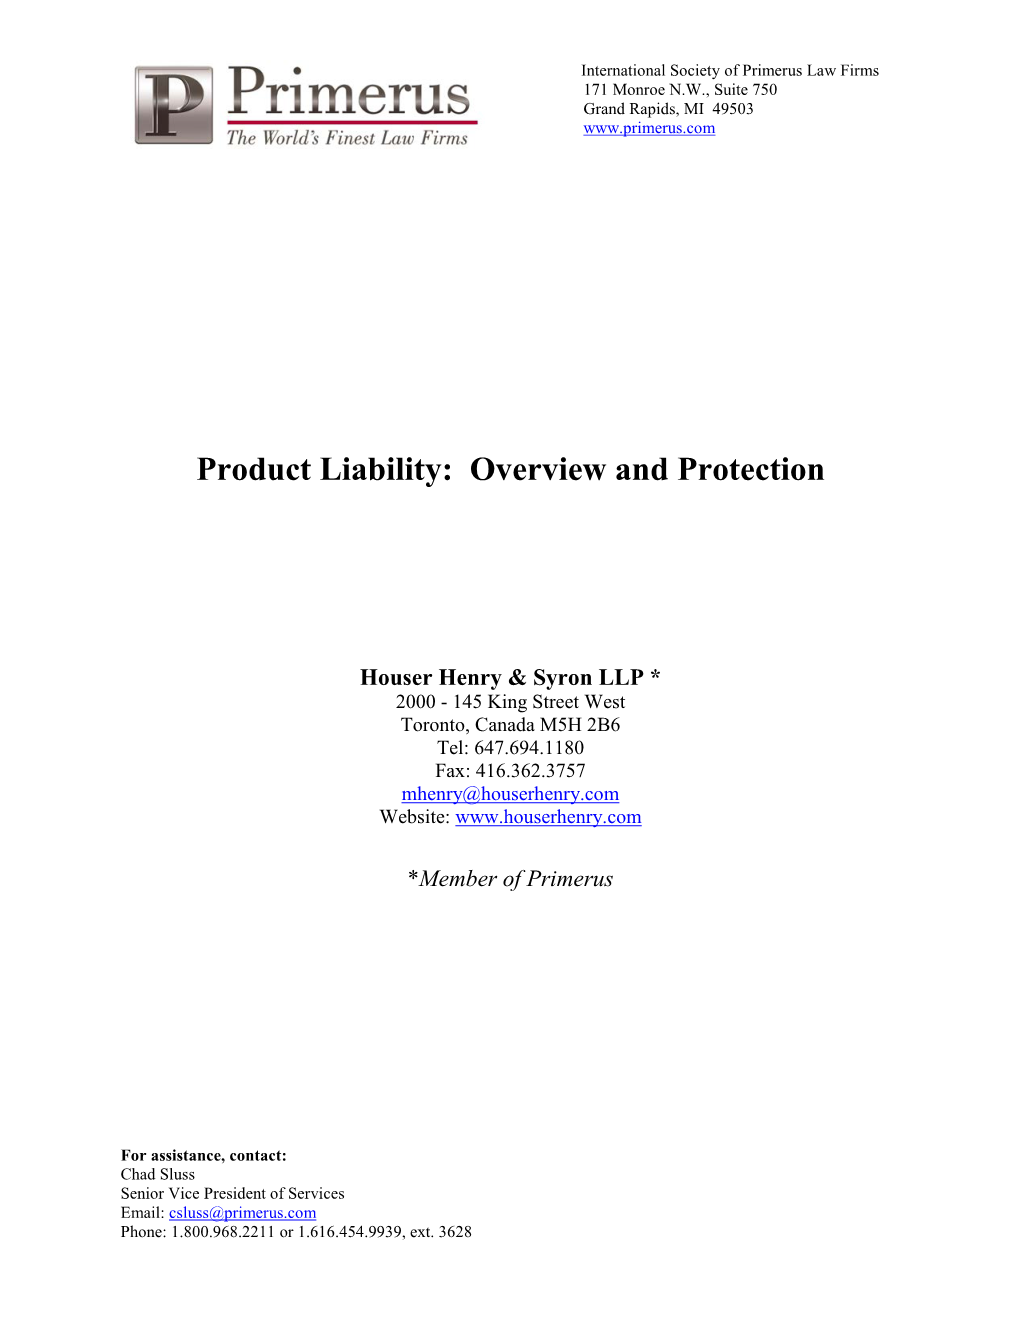 Product Liability: Overview and Protection